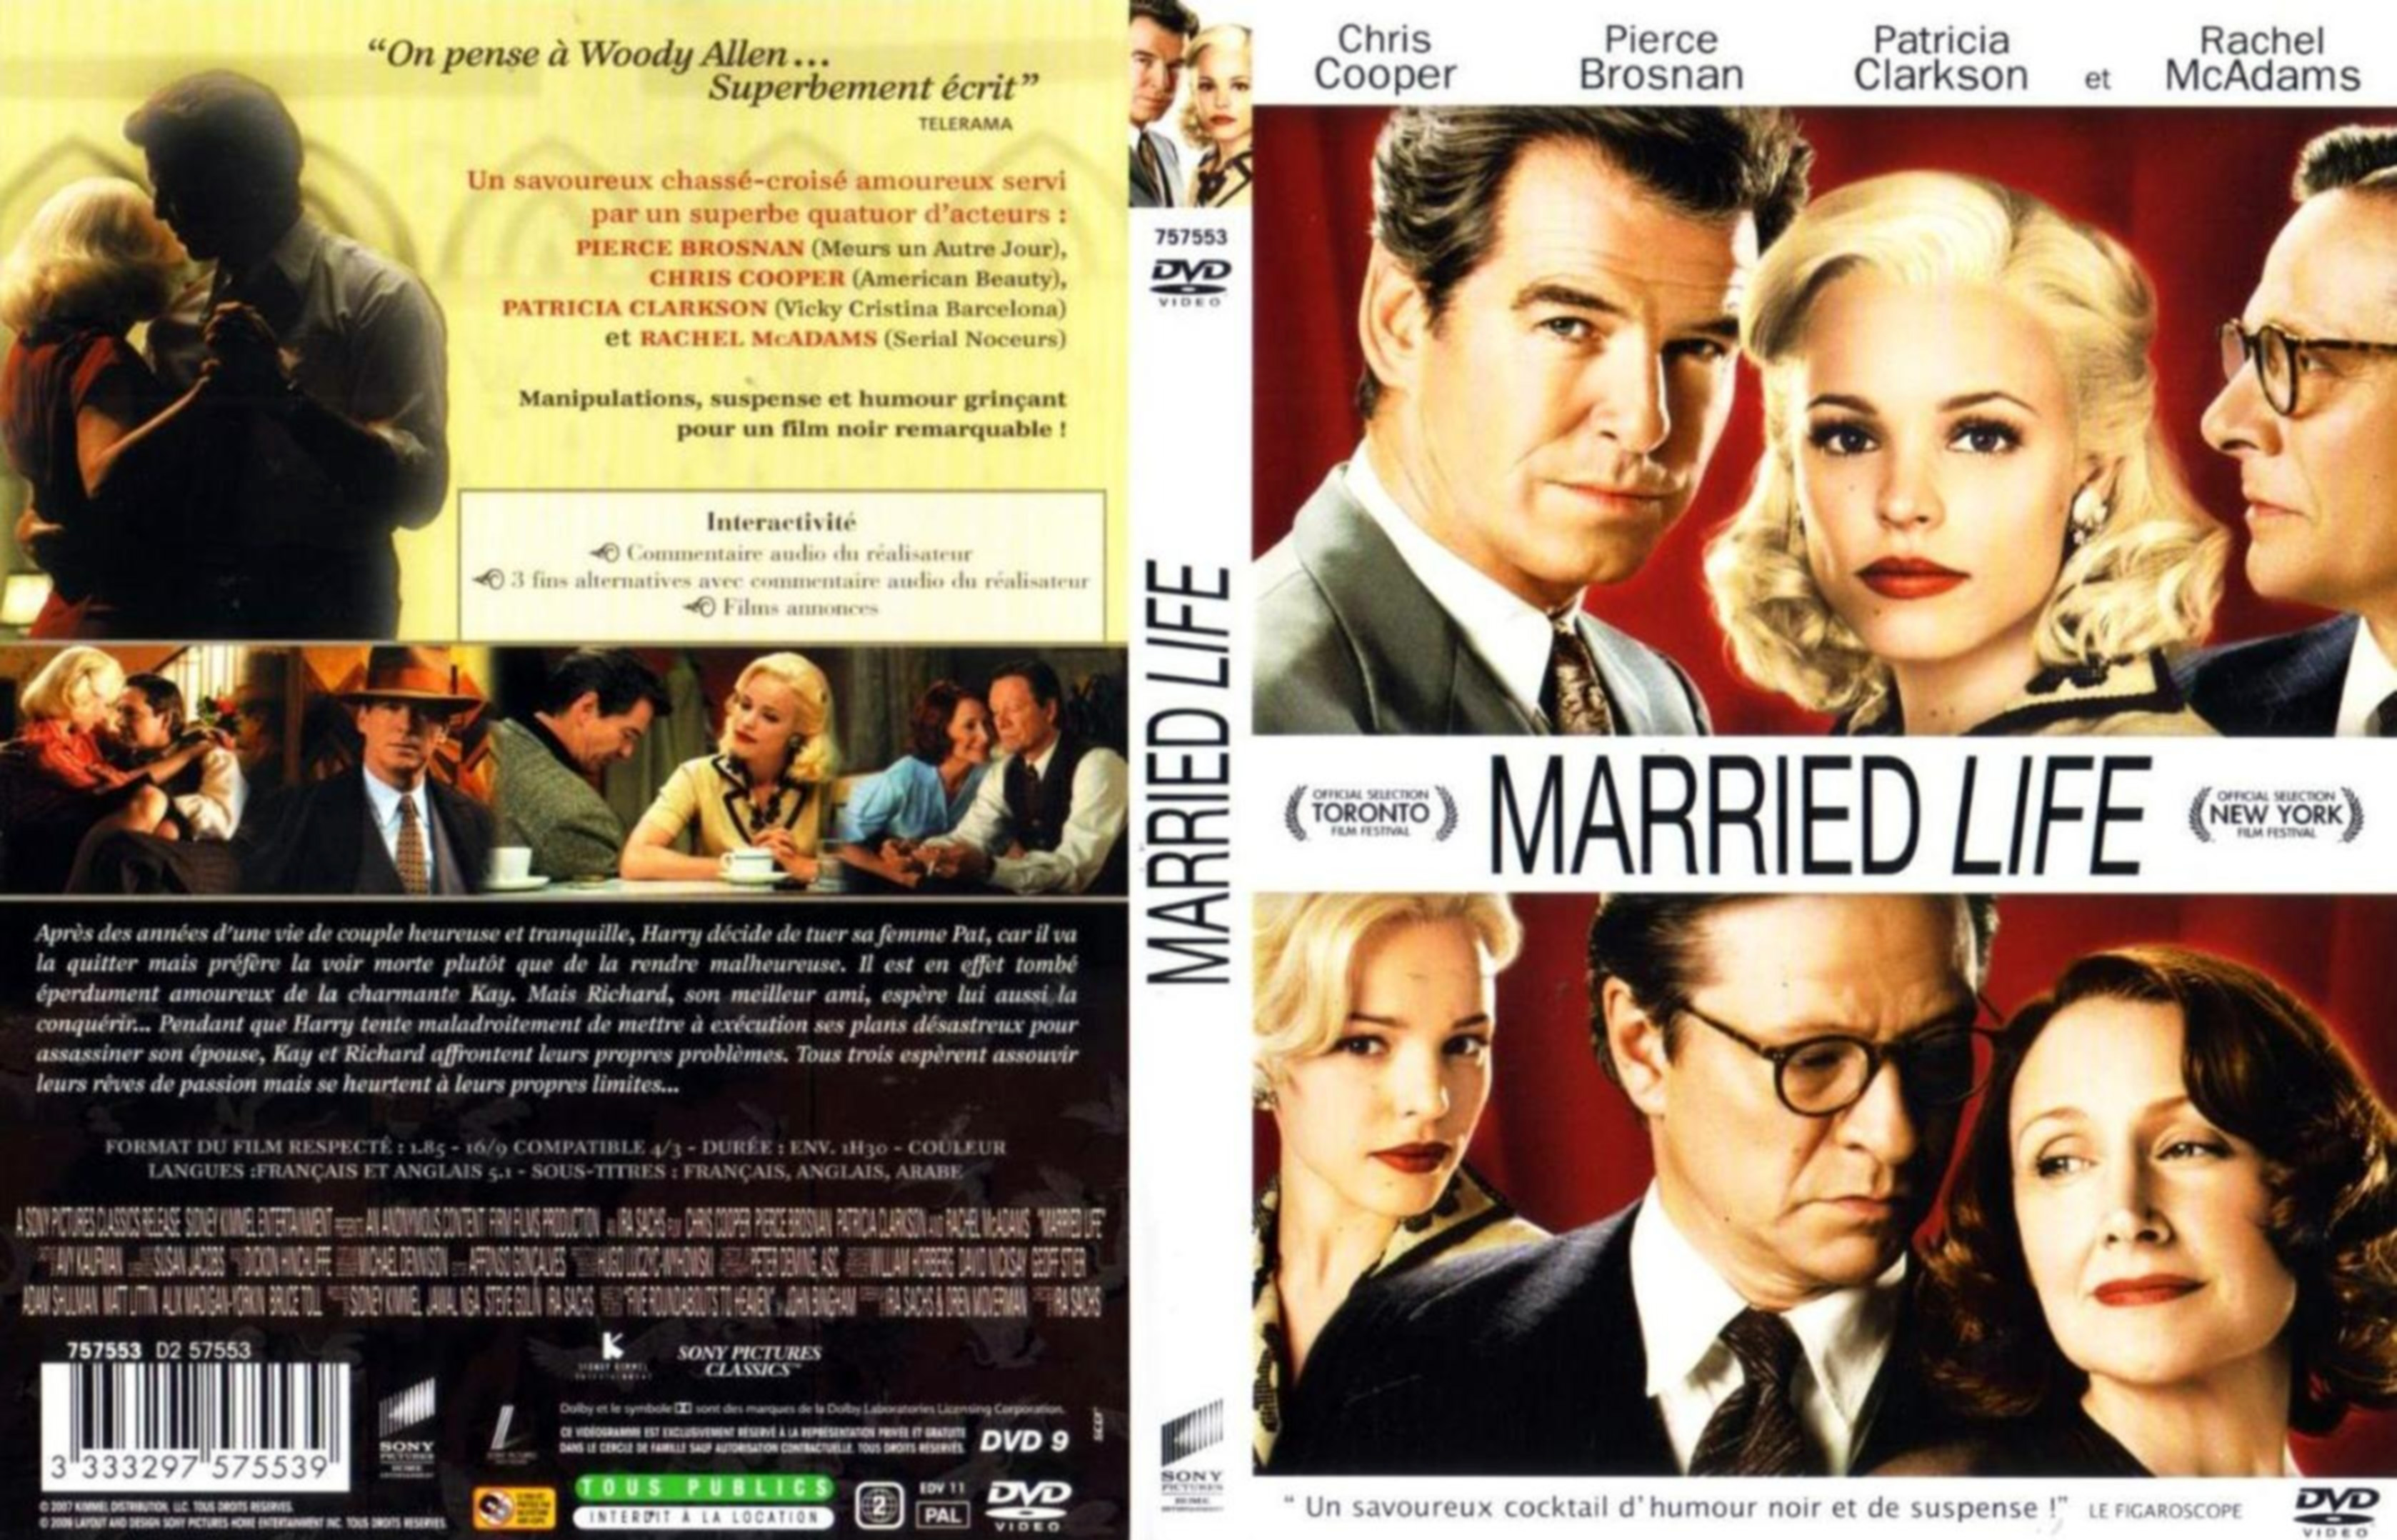 Jaquette DVD Married life